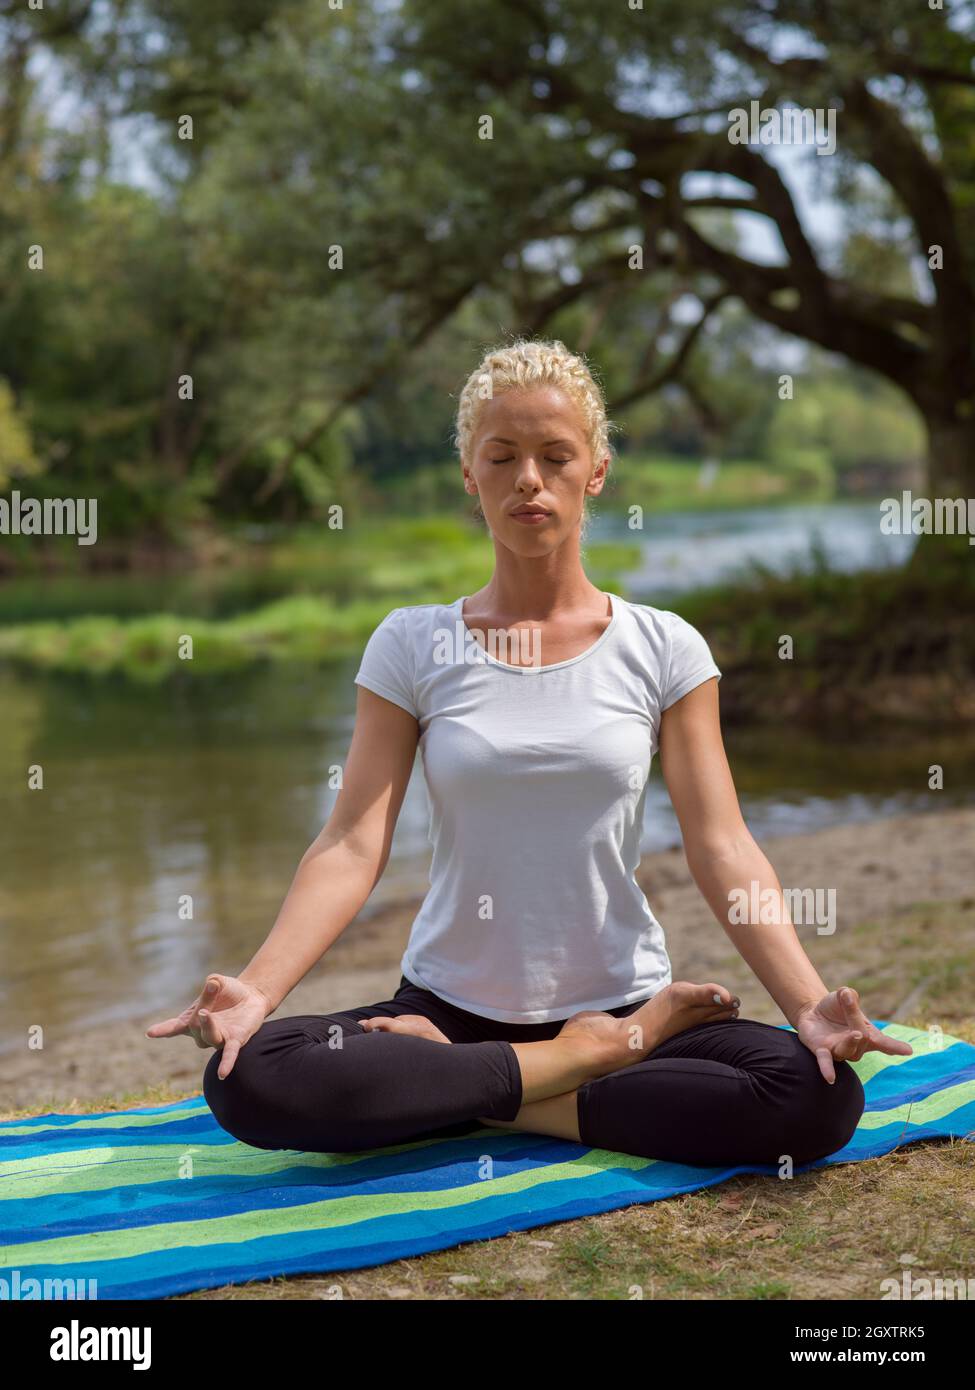 healthy woman relaxing while meditating and doing yoga exercise in